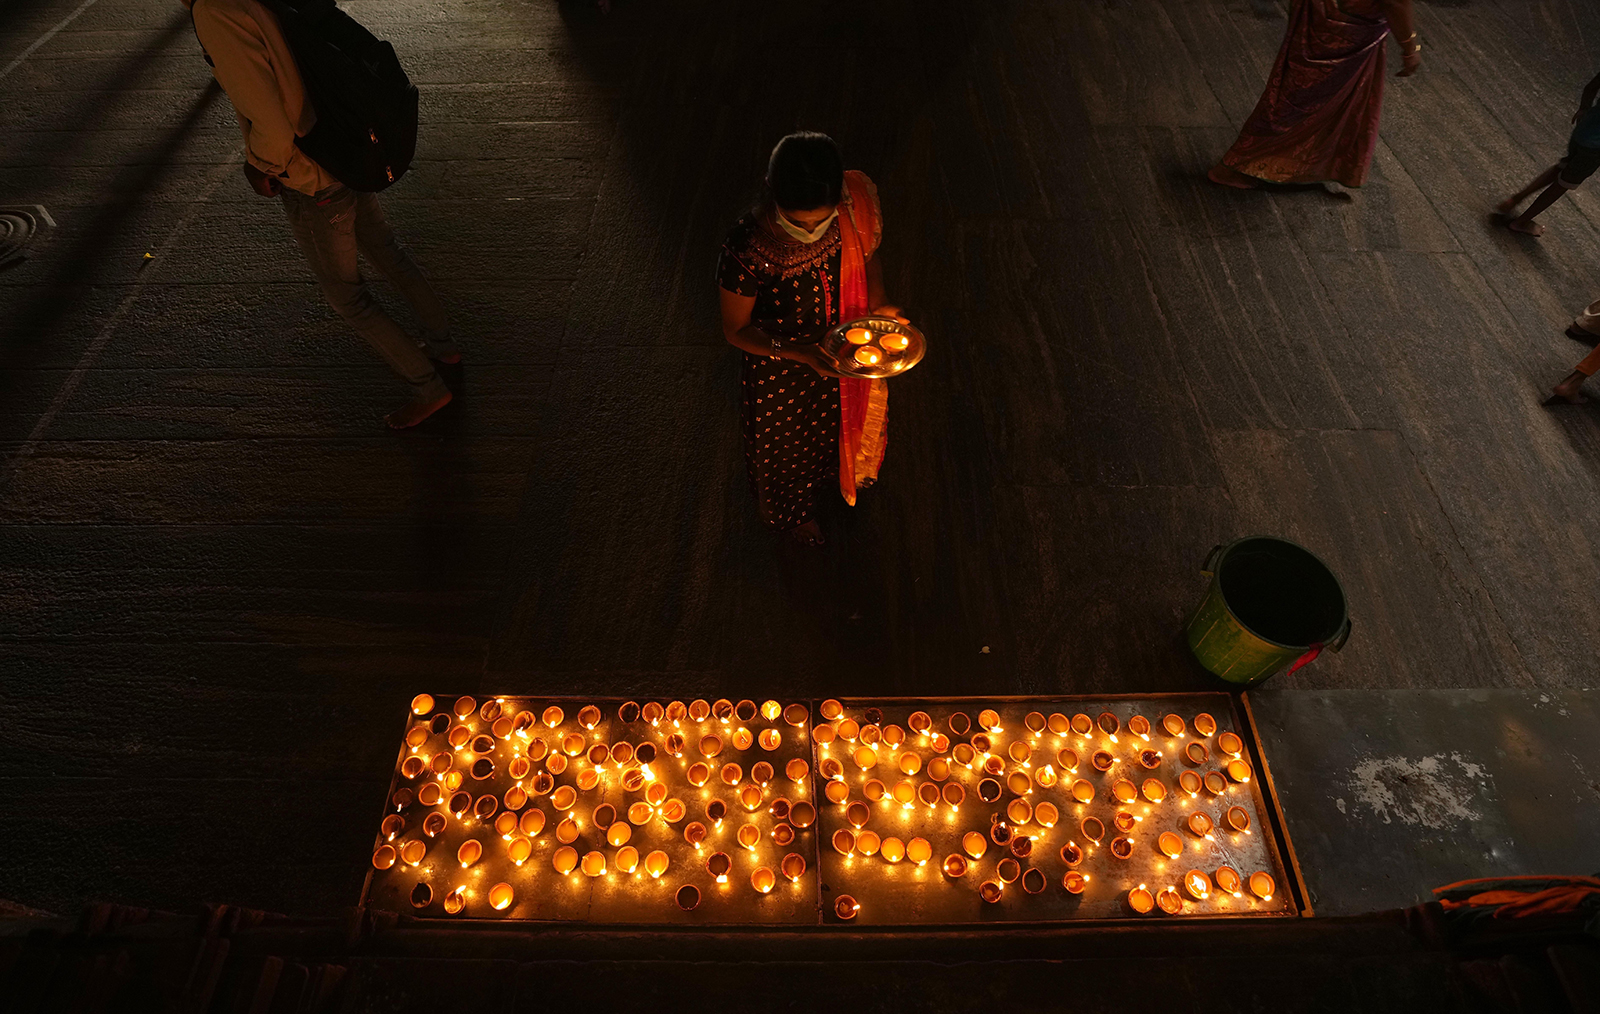 An ethnic Tamil woman prays holding a tray of oil lamps during Diwali, the Hindu festival of lights, in Colombo, Sri Lanka, Thursday, Nov. 4, 2021. Diwali is one of Hinduism's most important festivals. (AP Photo/Eranga Jayawardena)